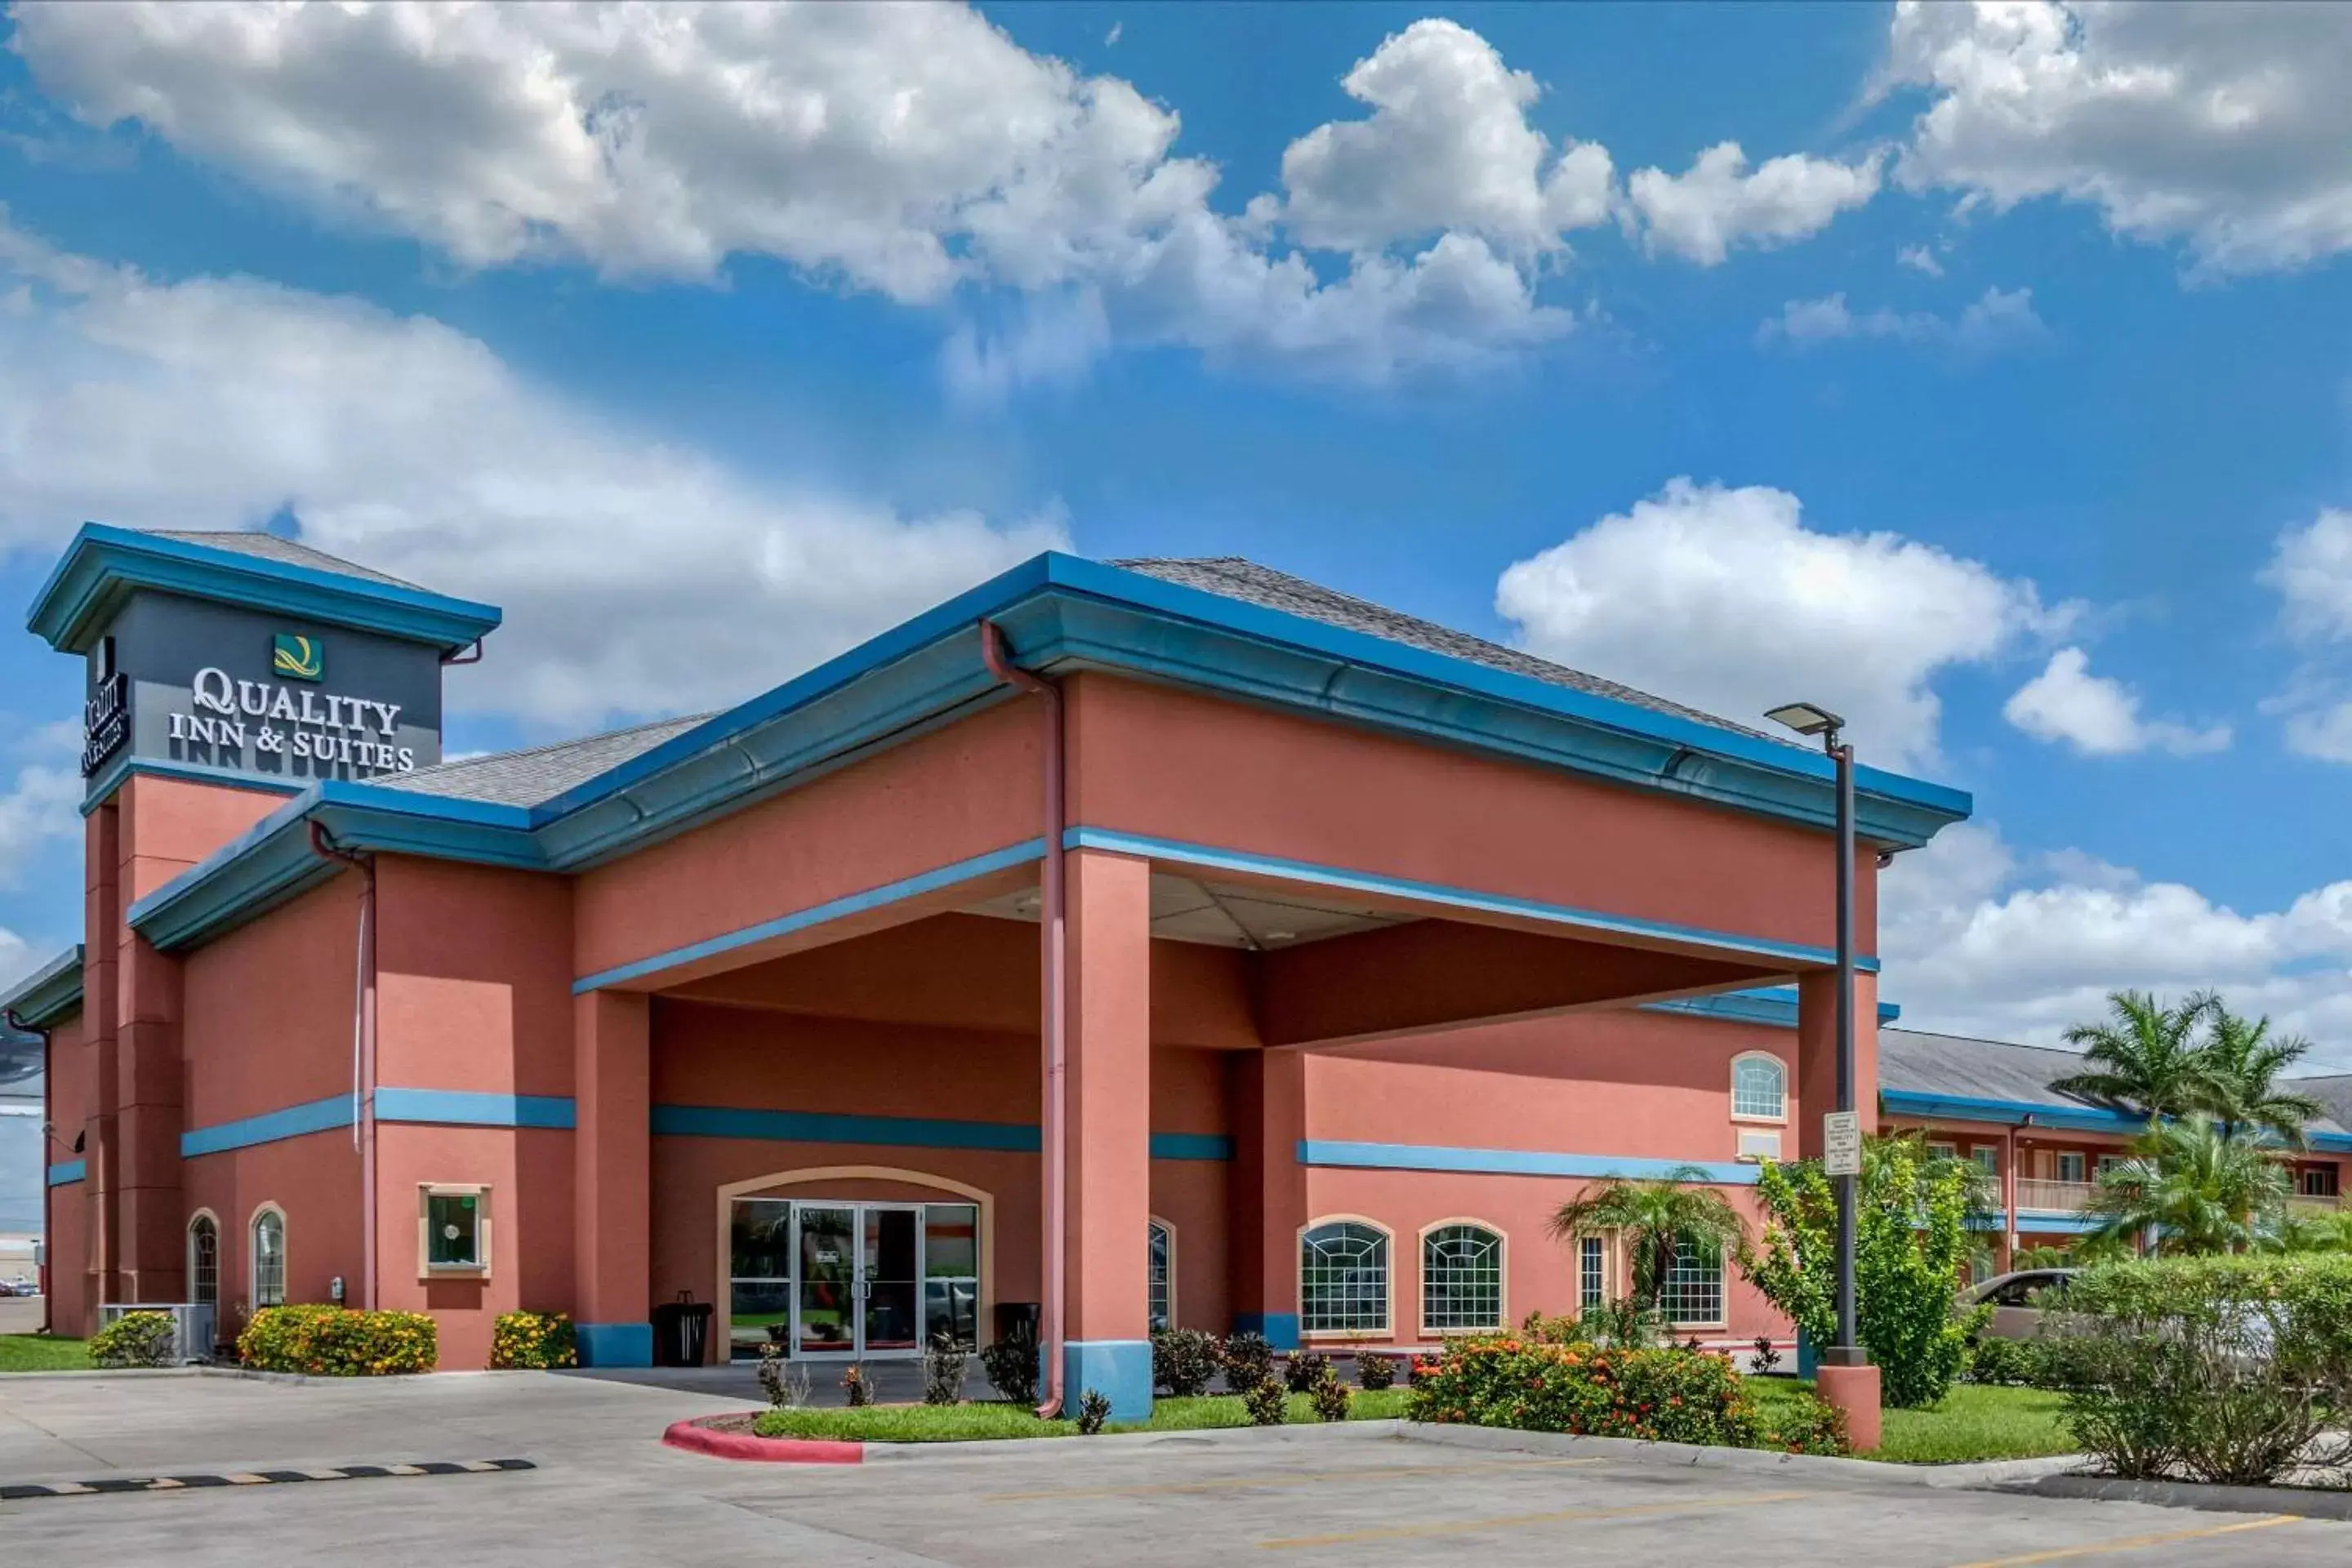 Property building in Quality Inn & Suites at The Outlets Mercedes/Weslaco